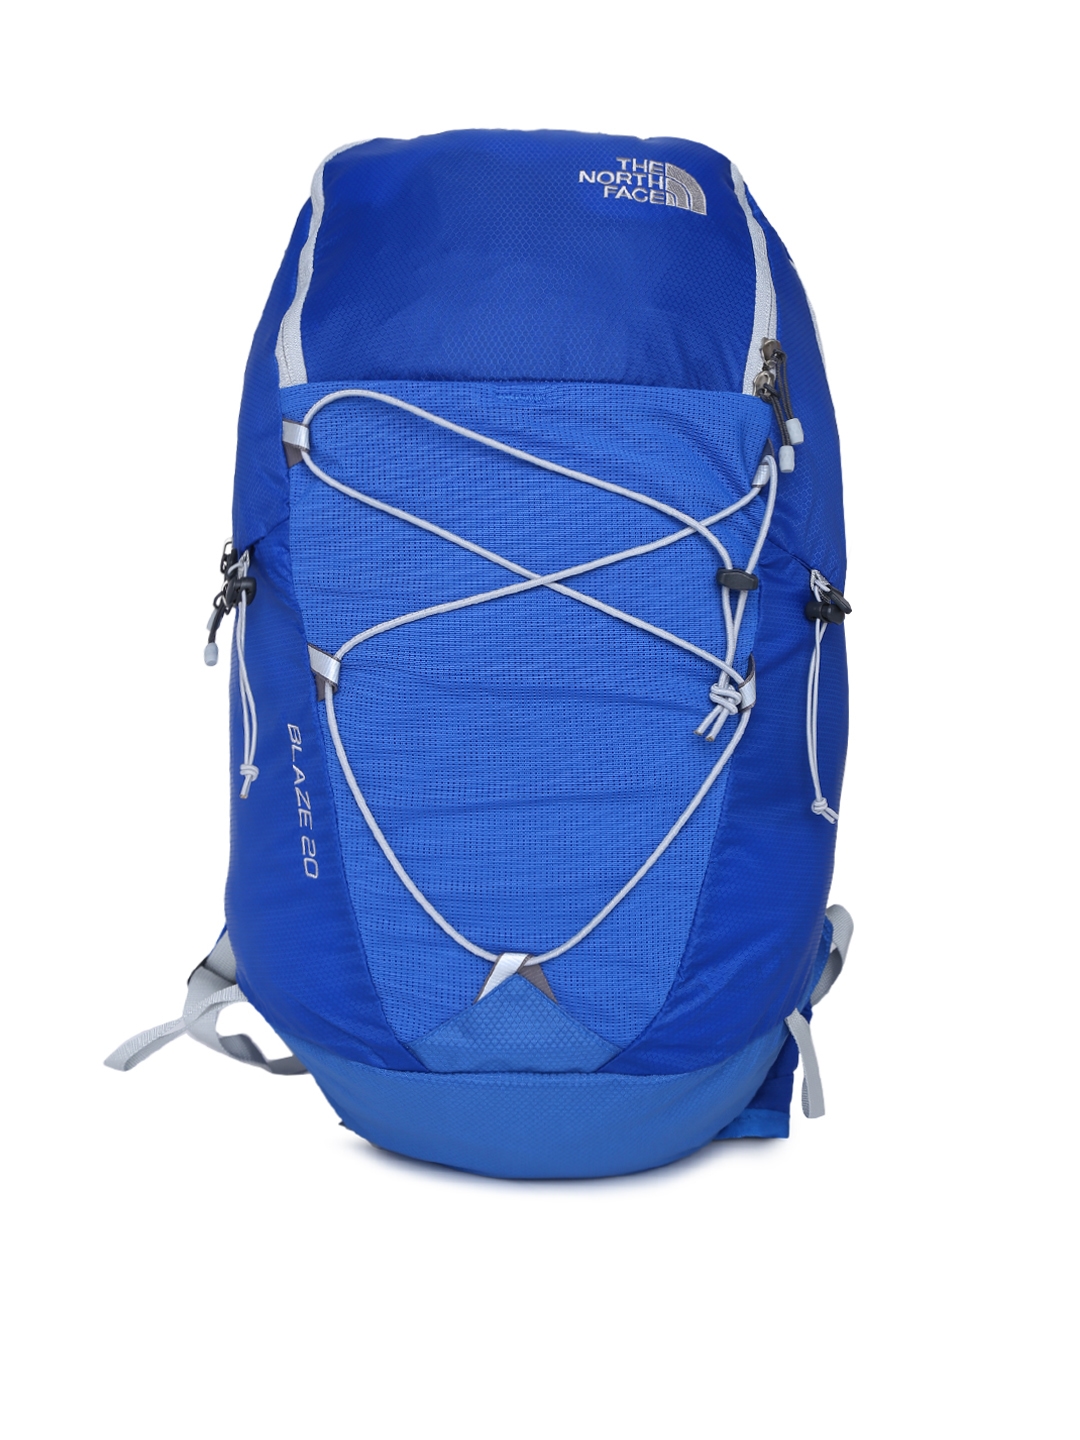 the north face blaze backpack